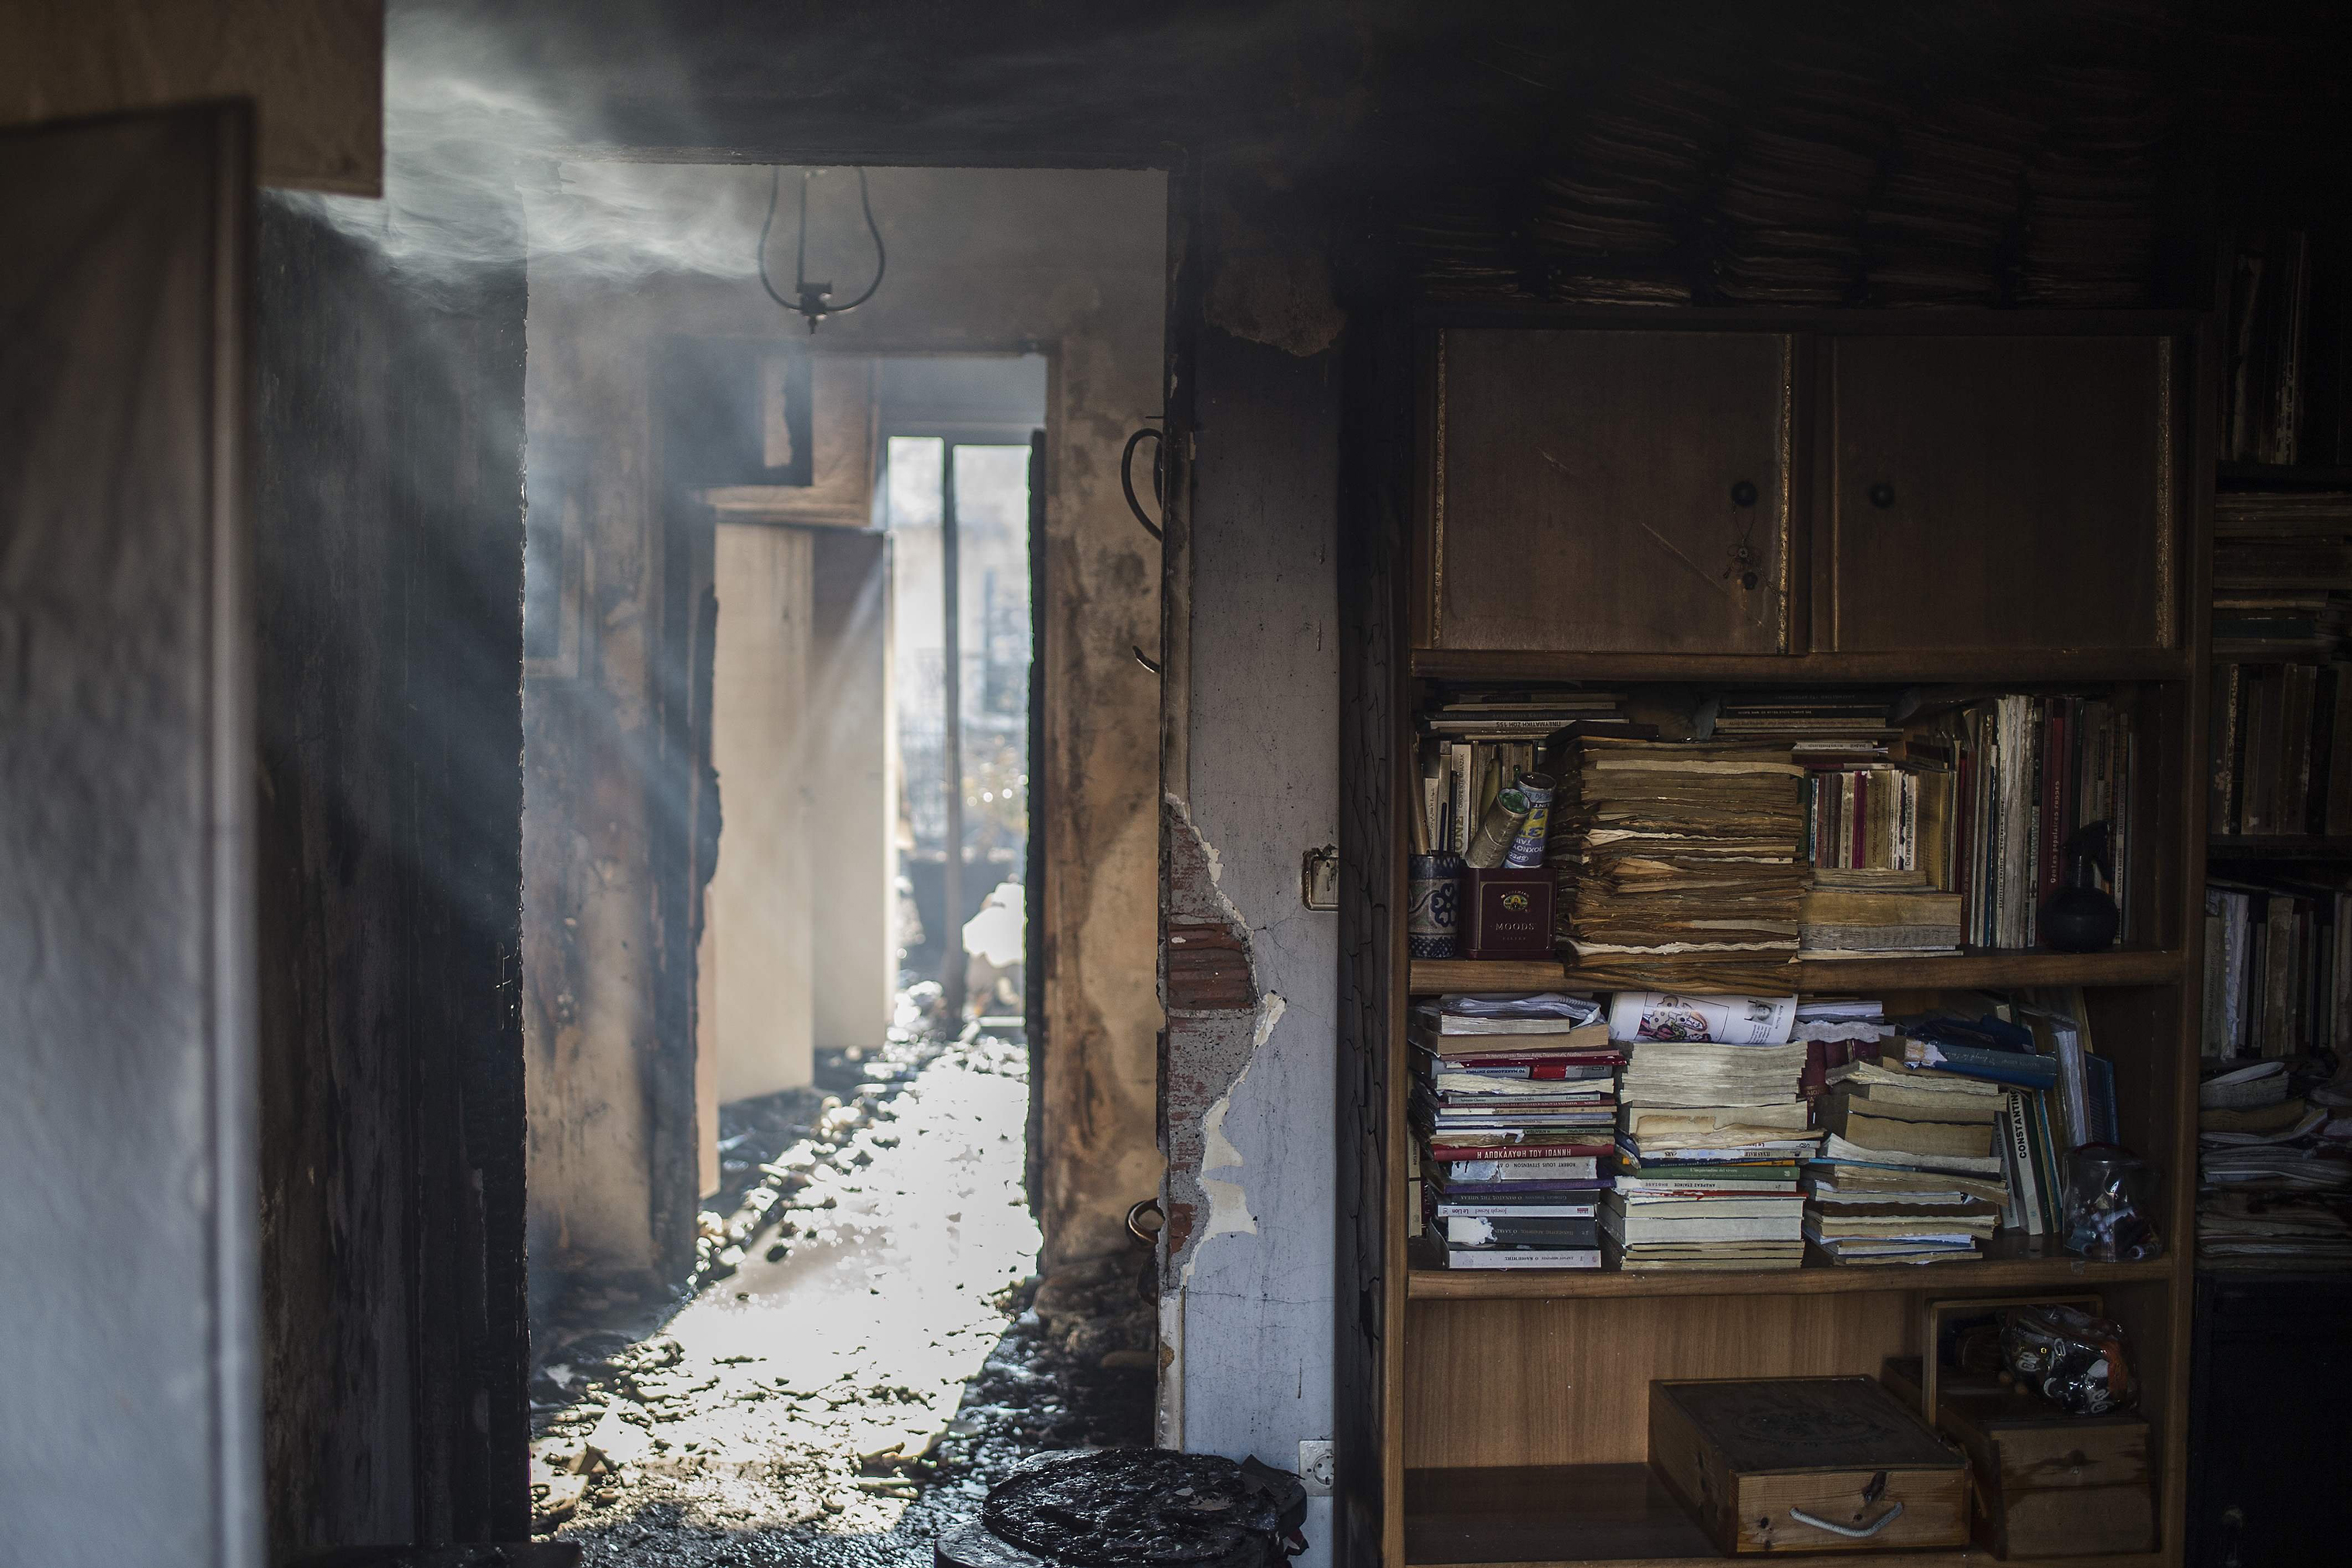 Books inside a burned house in the village of Neos Voutzas, near Athens, on July 25, 2018. (Angelos Tzortzinis—AFP/Getty Images)